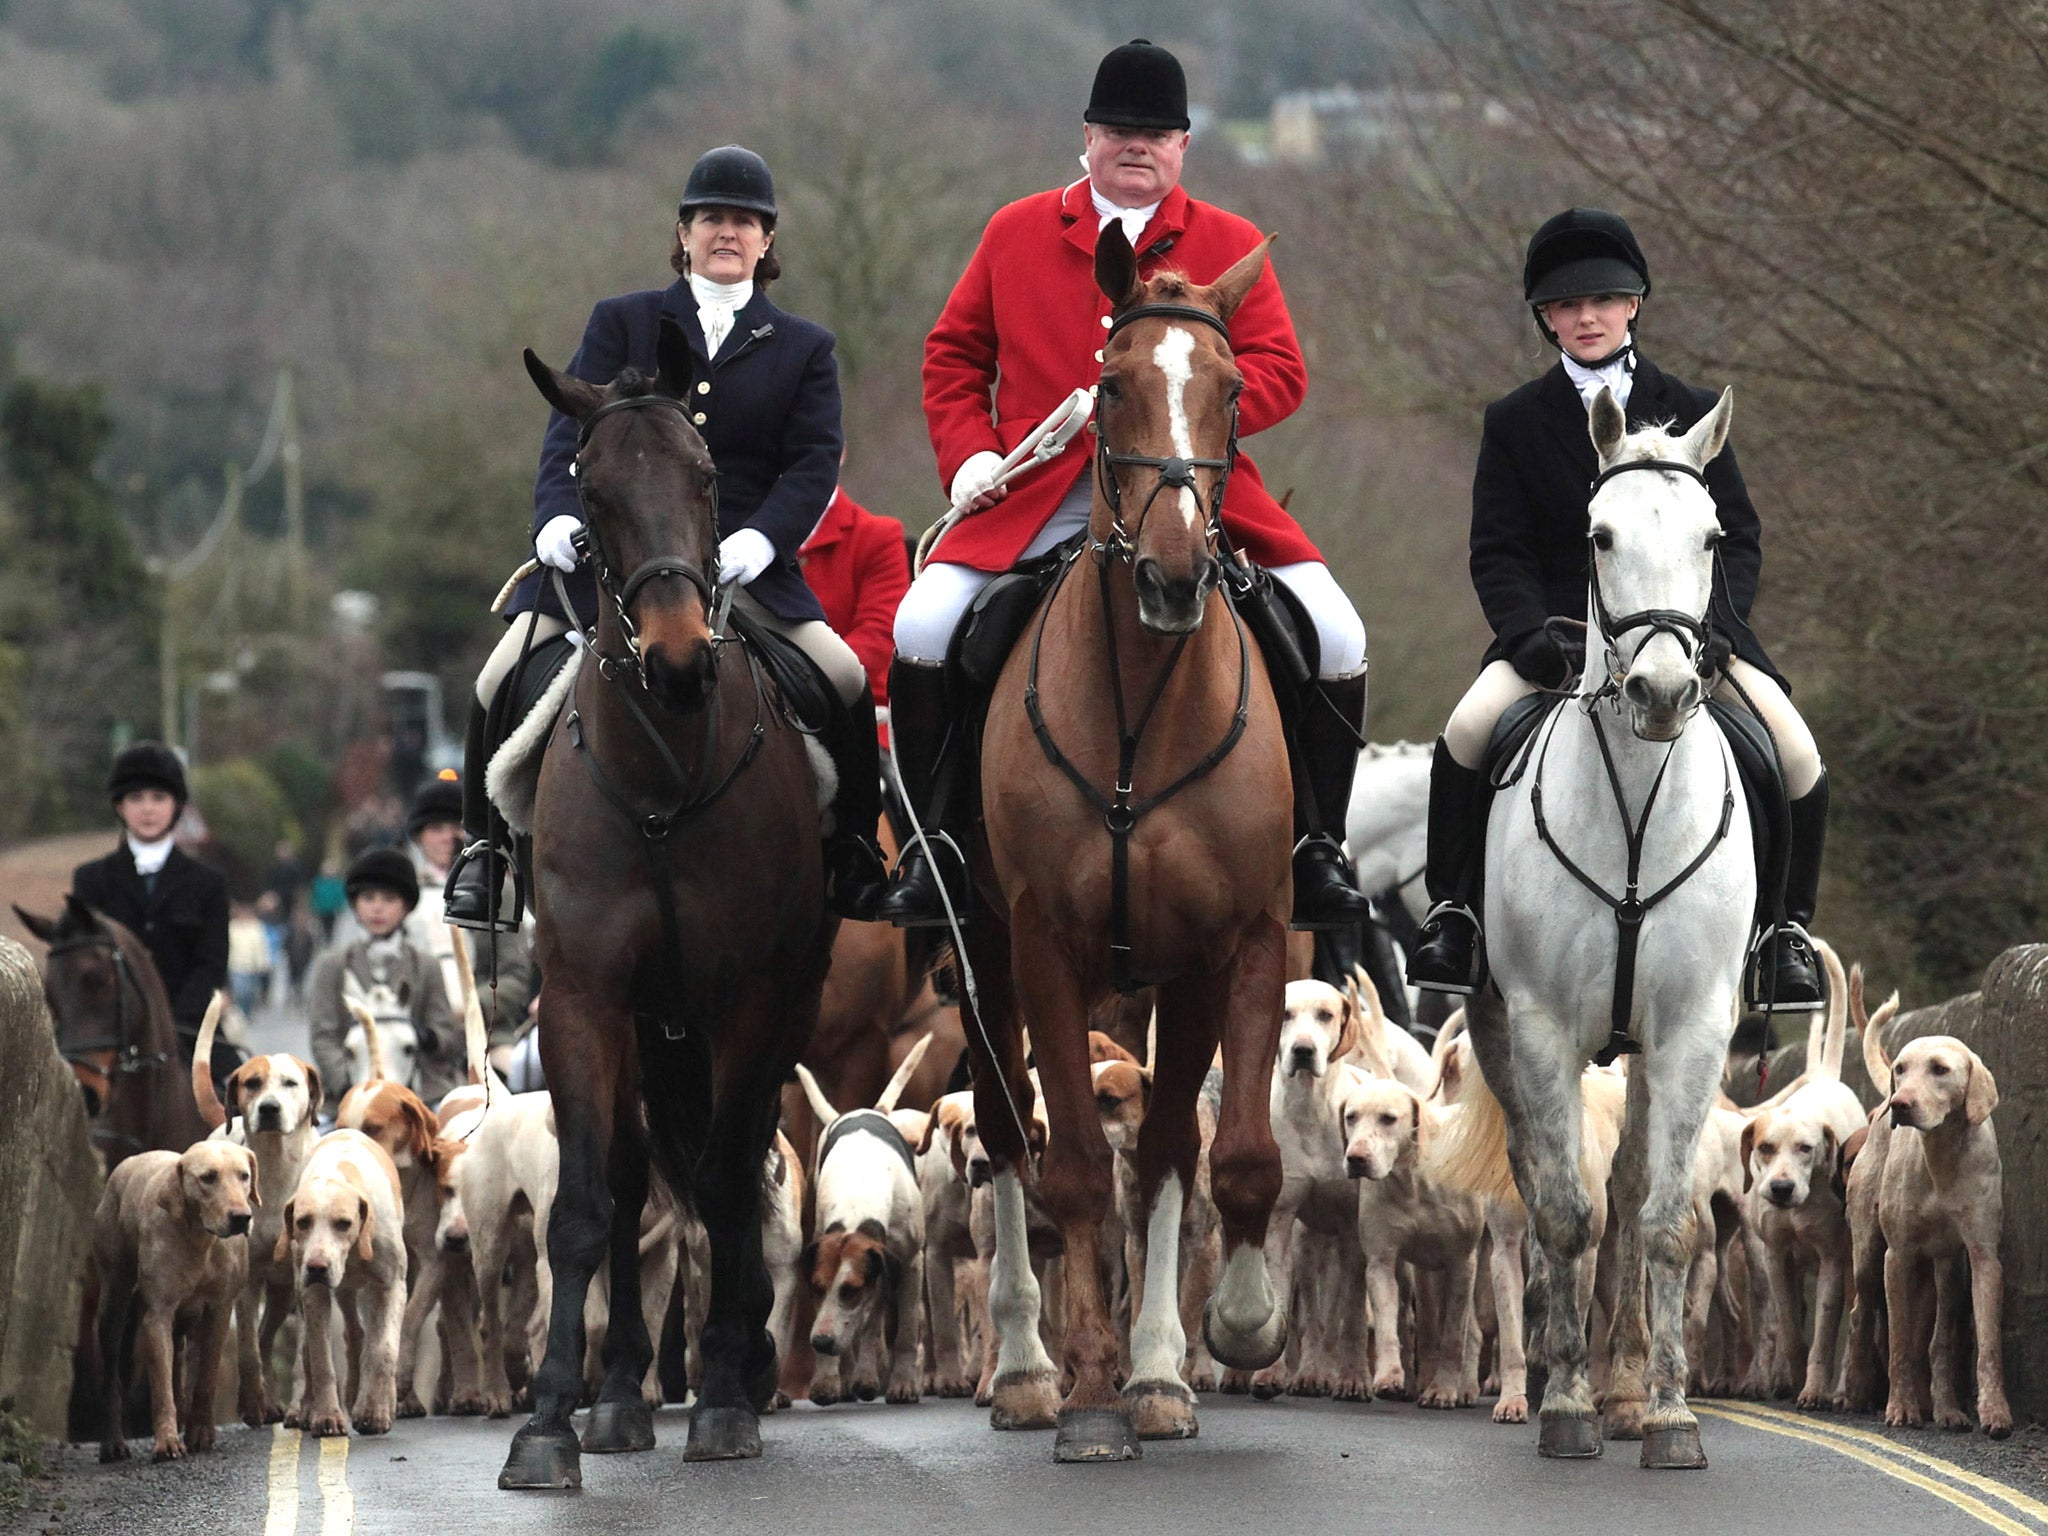 The traditional Boxing Day hunt in Lacock